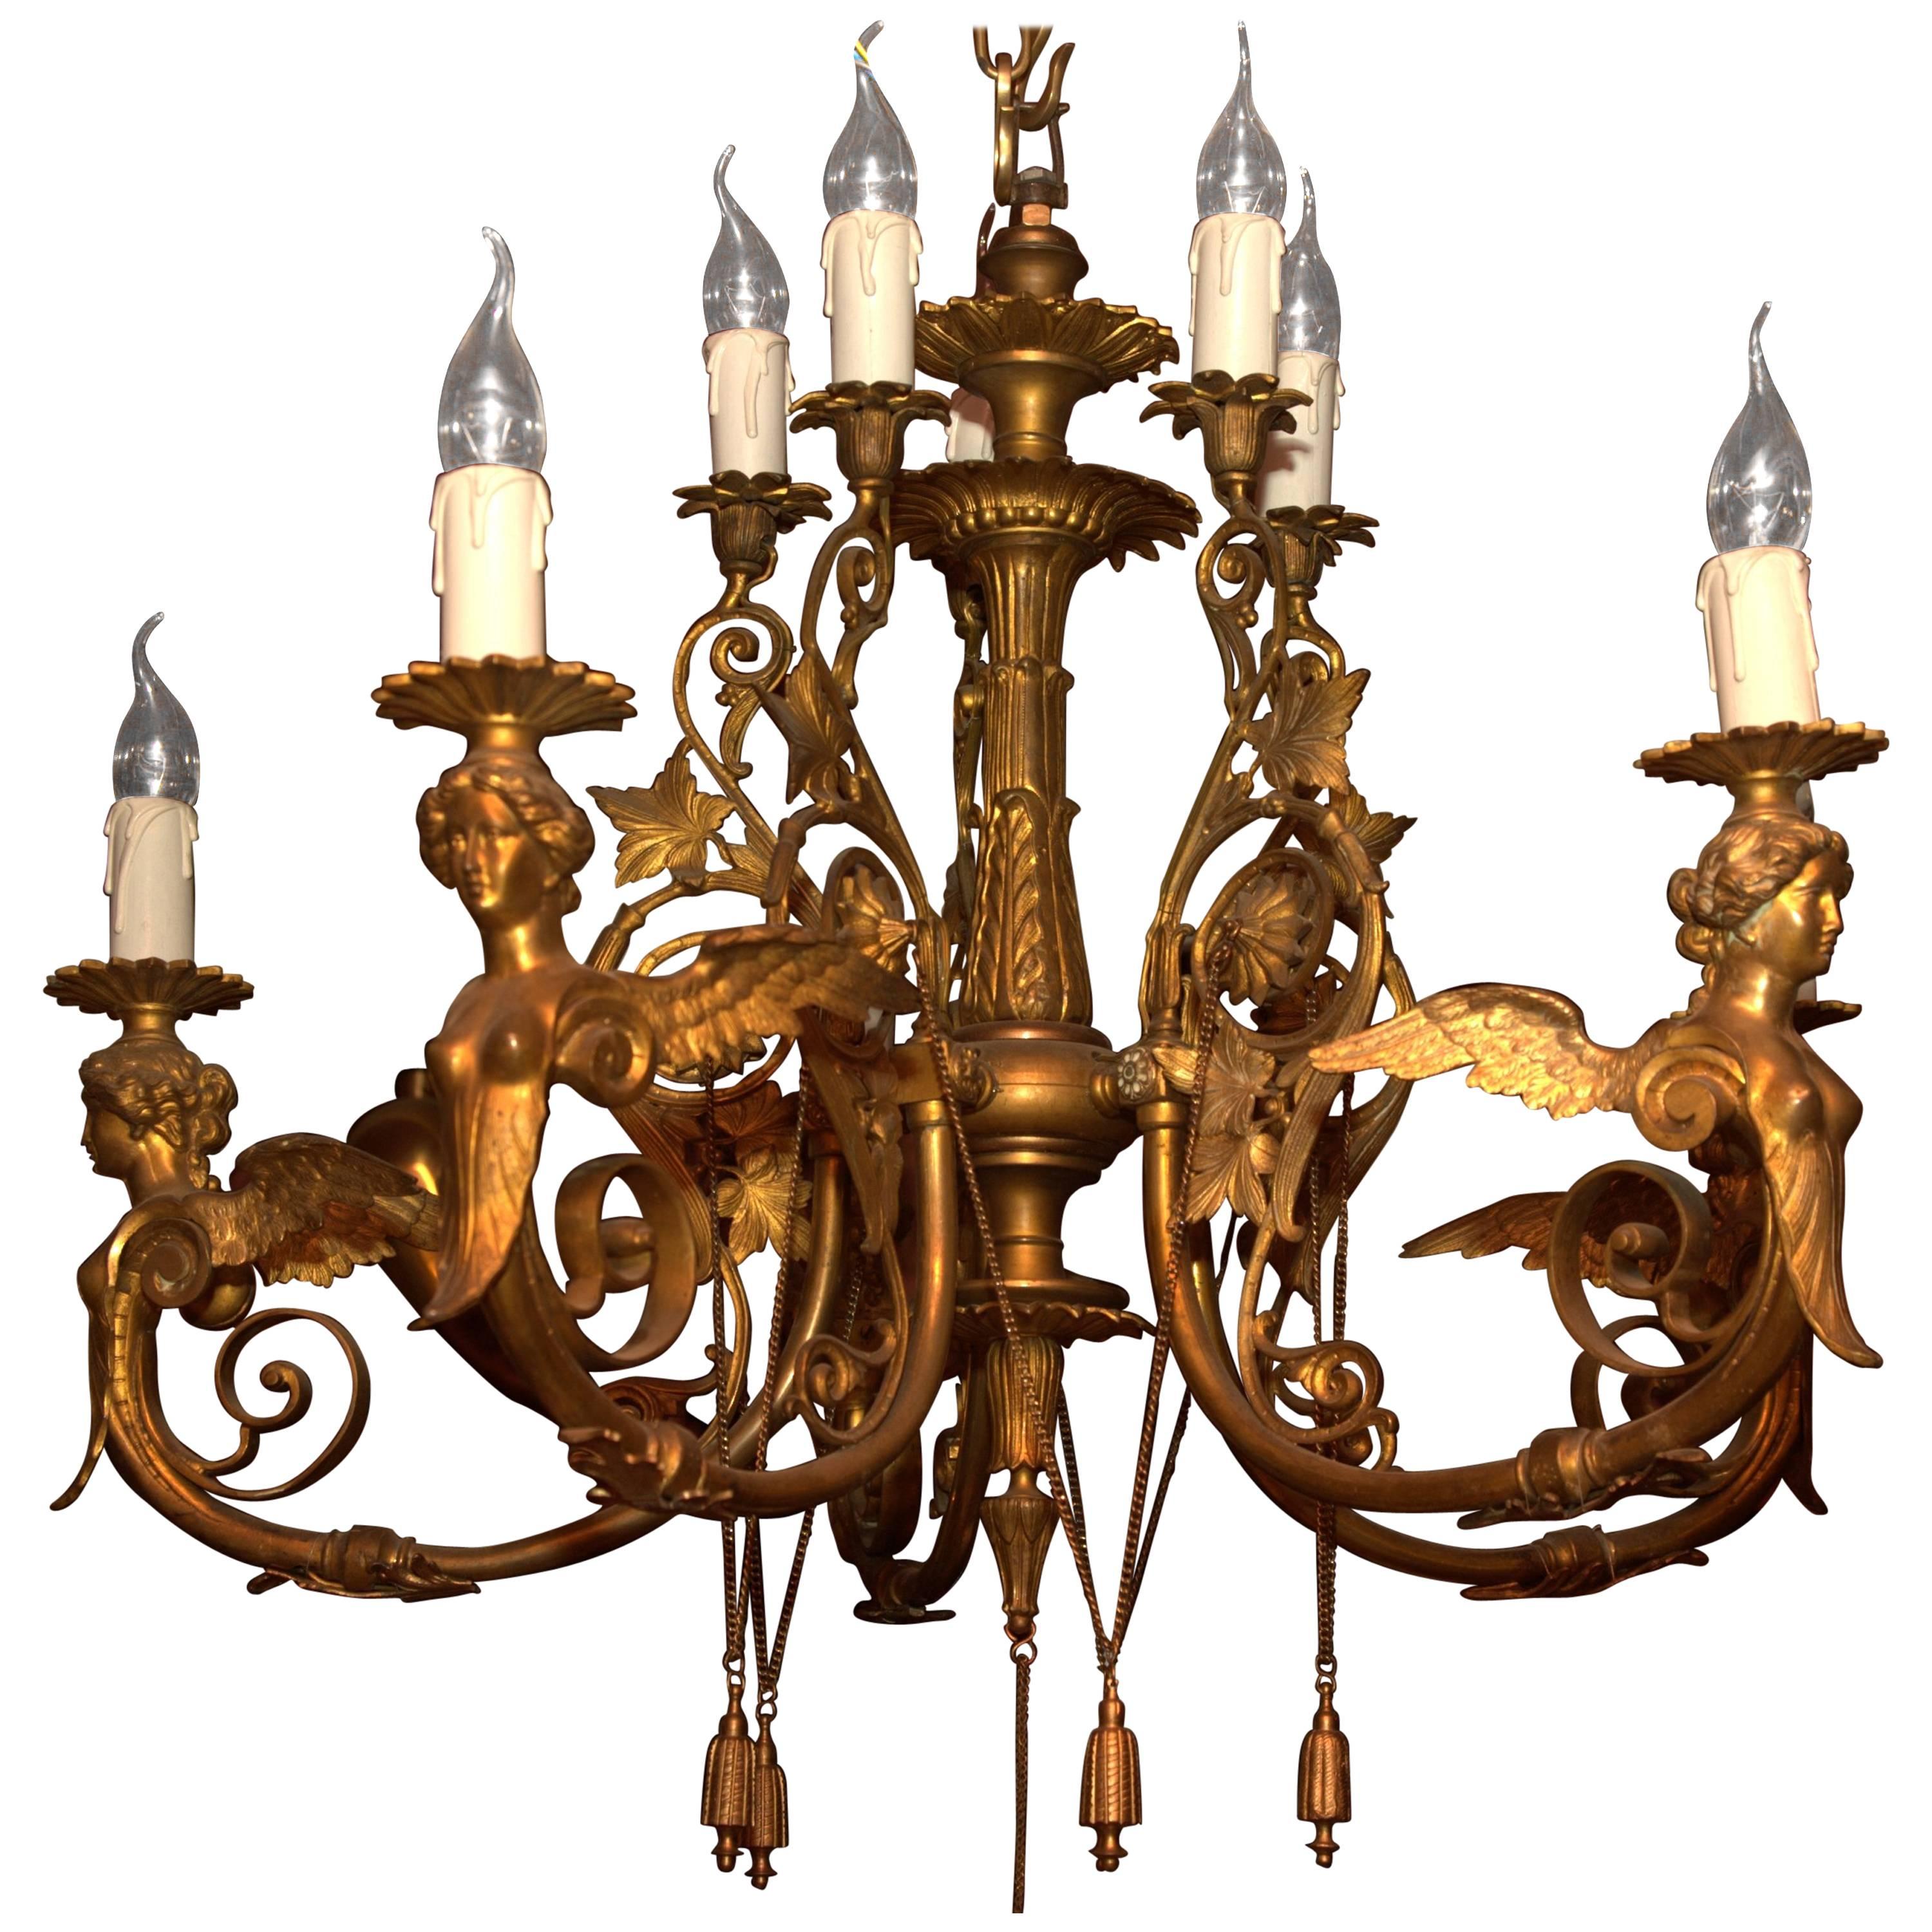 19th Century, Antique Classicist Ceiling Lamp Chandelier in the Empire Style